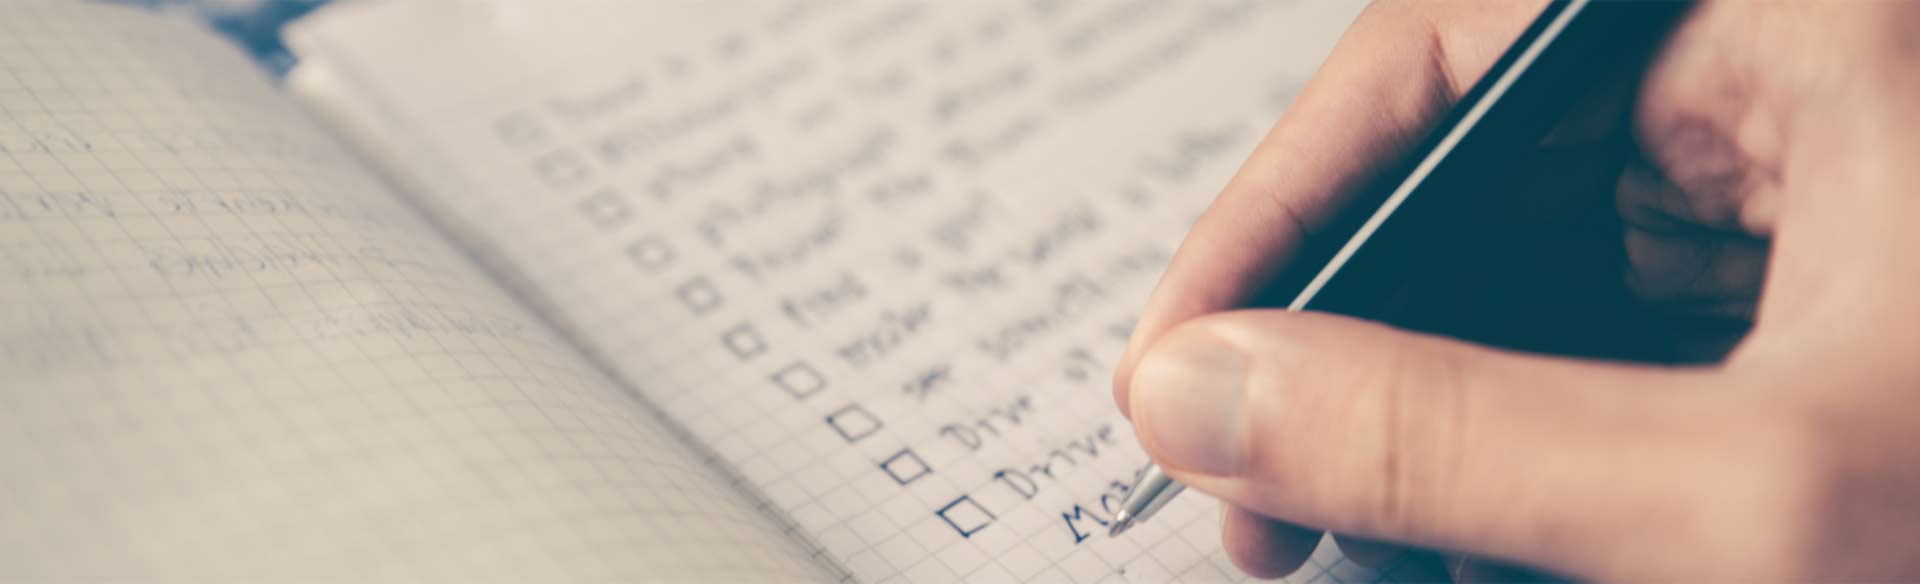 checklists are critical to getting everything done to market your blog post